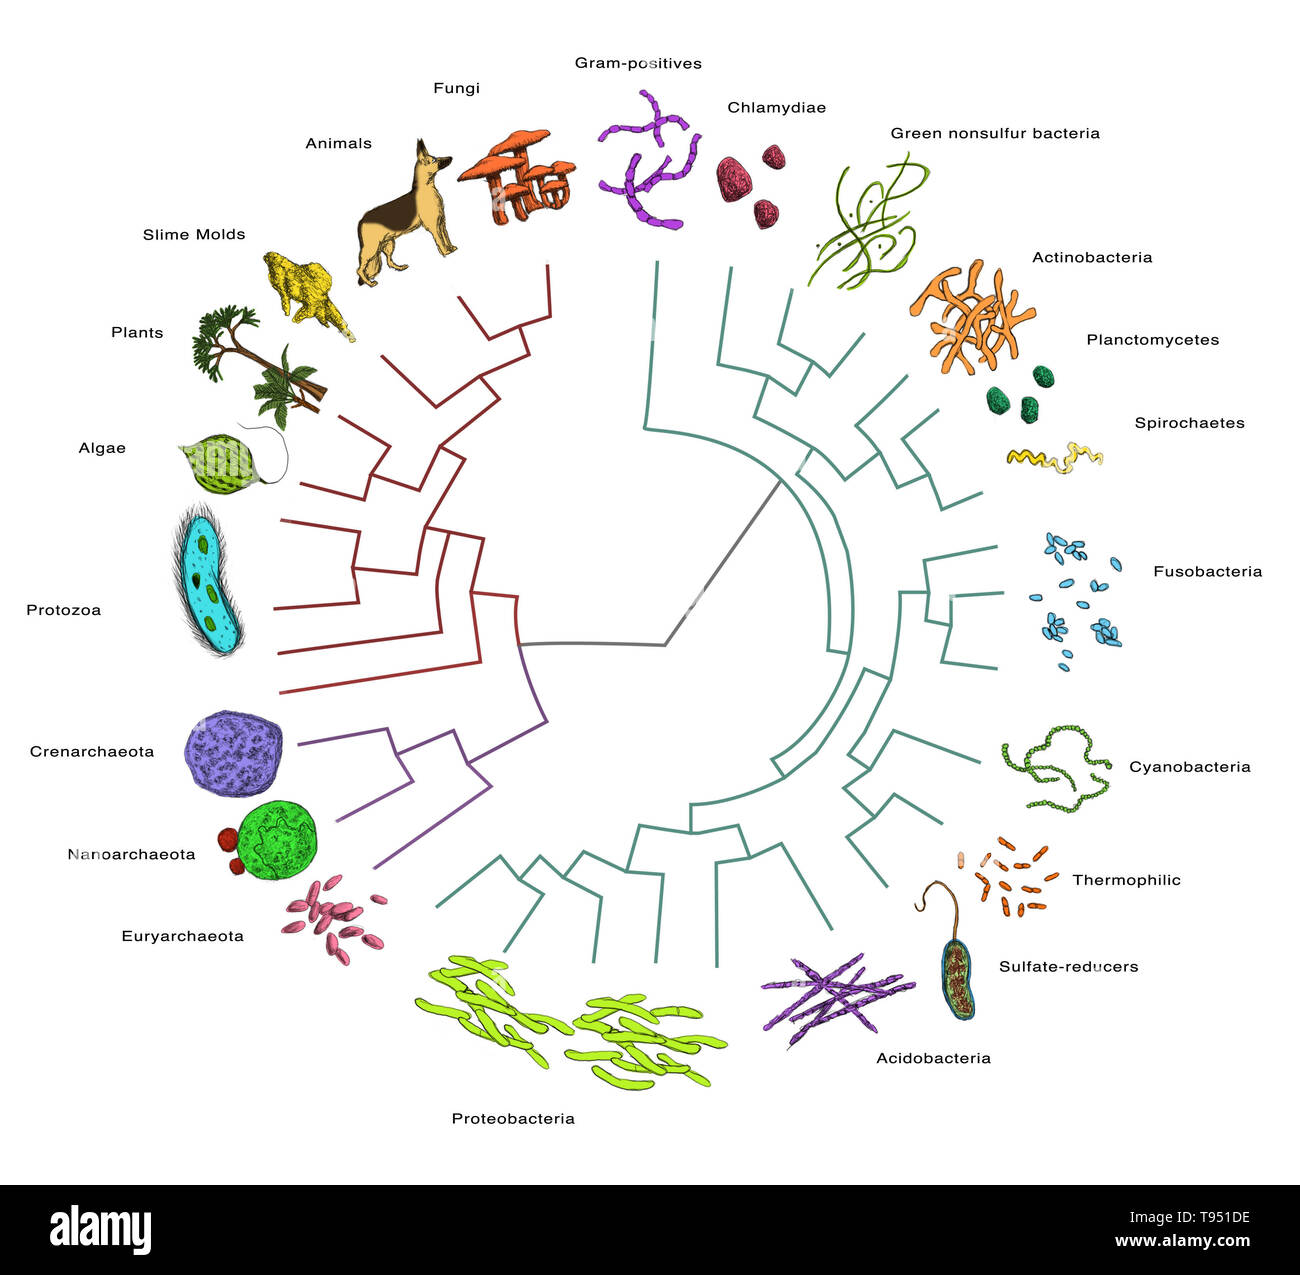 Phylogenetic (or evolutionary) tree, showing evolutionary relationships among various species, mostly bacteria. Stock Photo